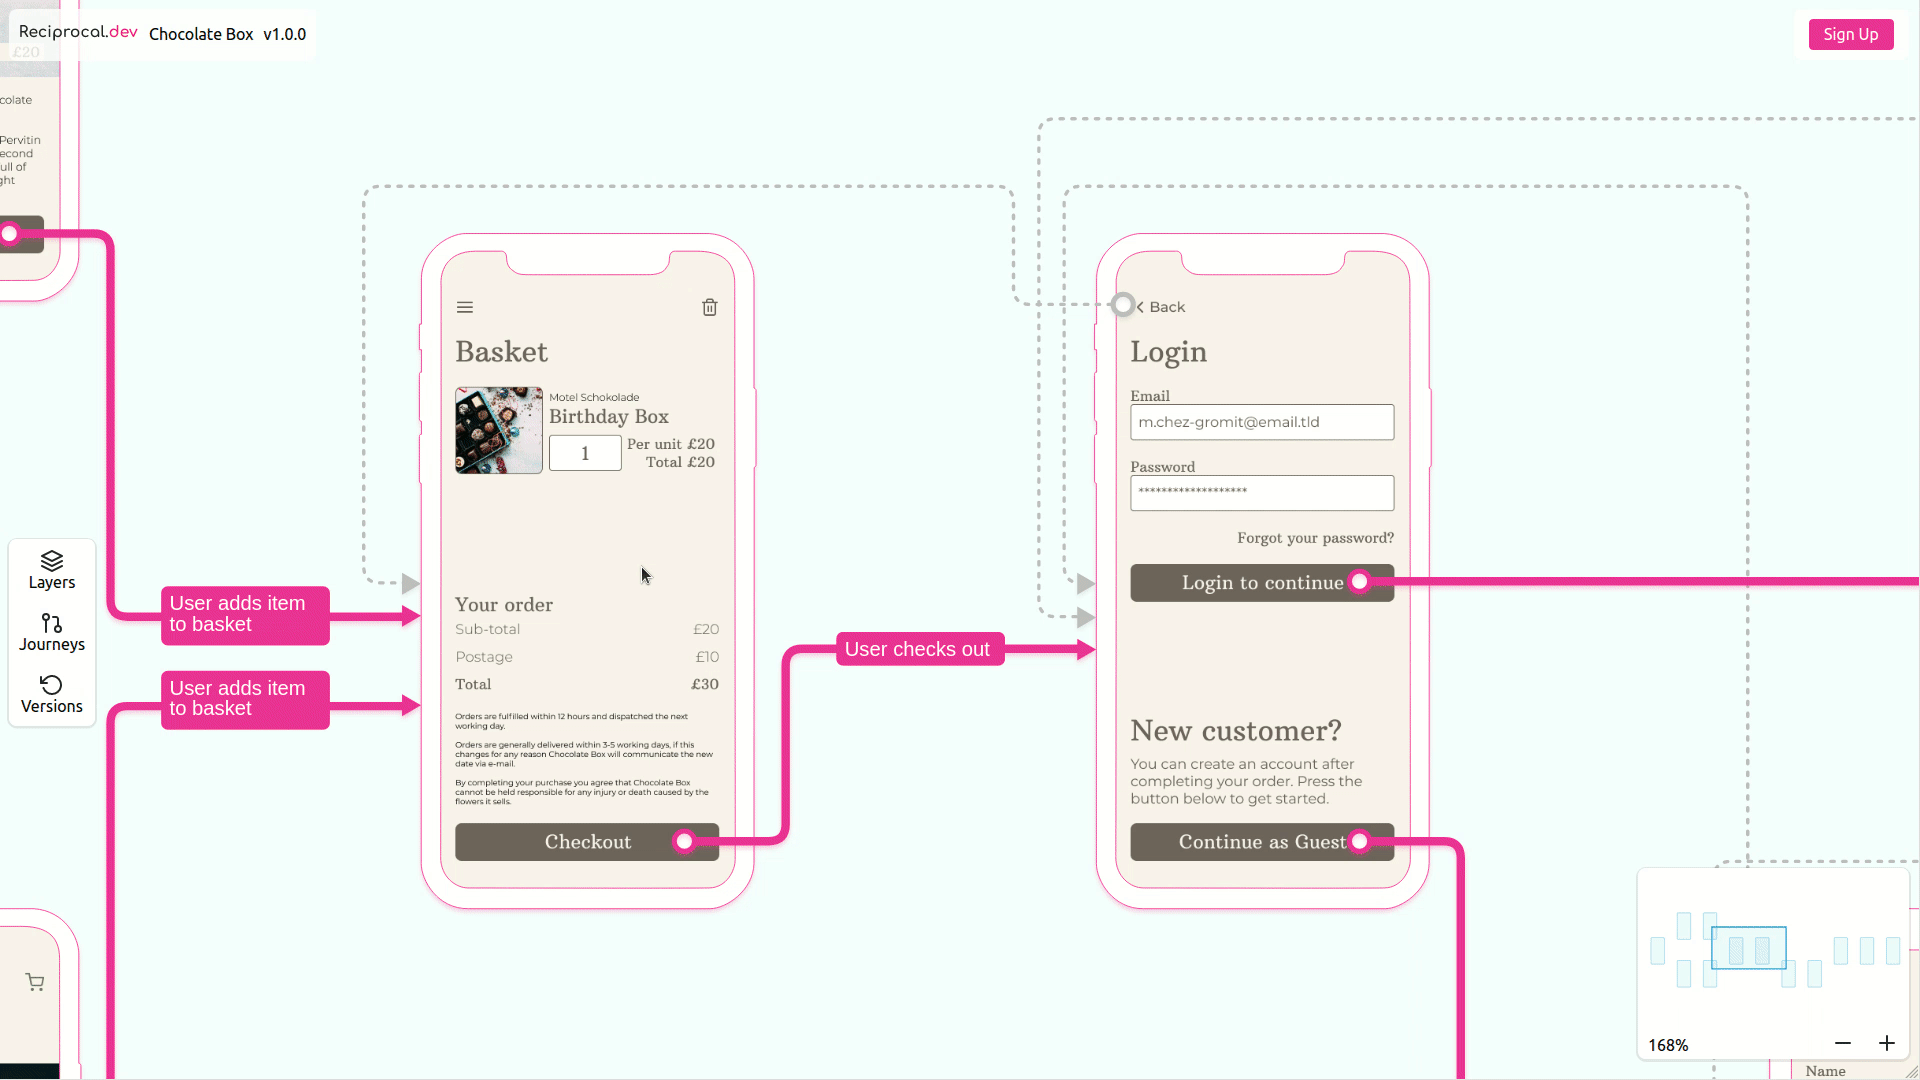 By adding a mini-map to reciprocal.dev users are now able to navigate across their user journey maps easier